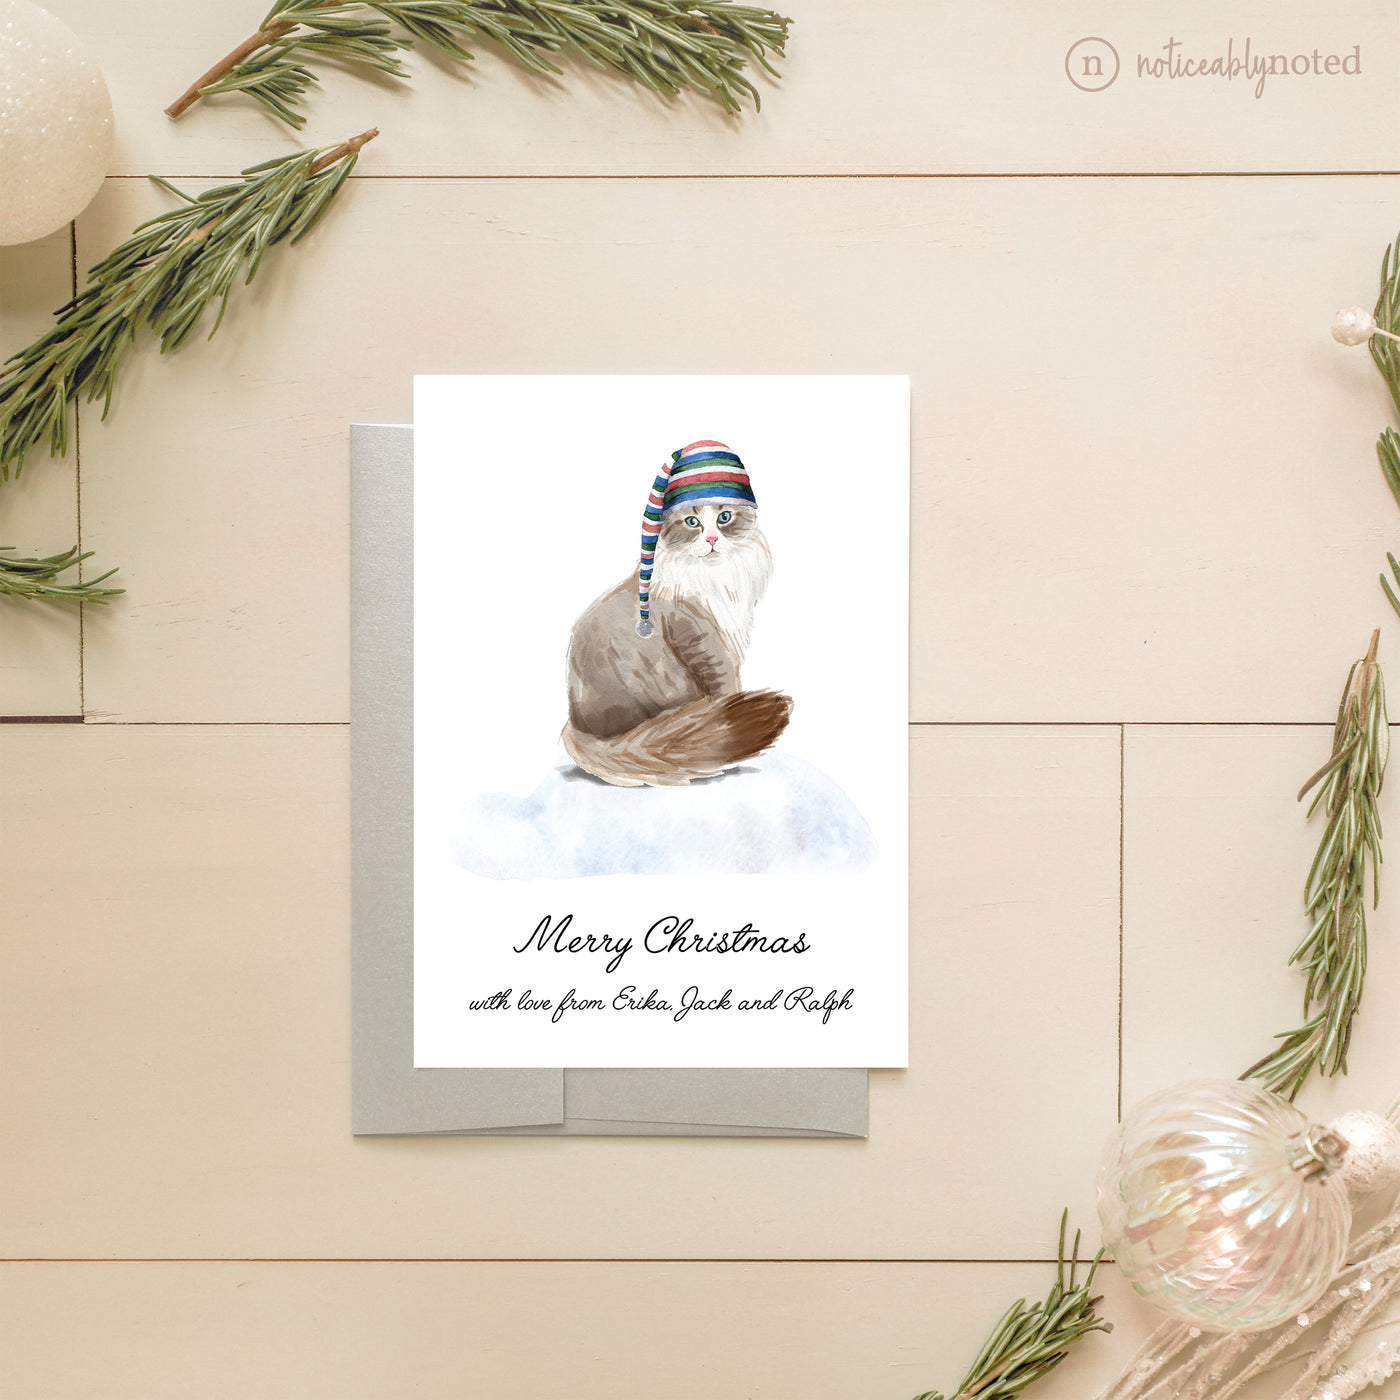 Siberian Christmas Card | Noticeably Noted